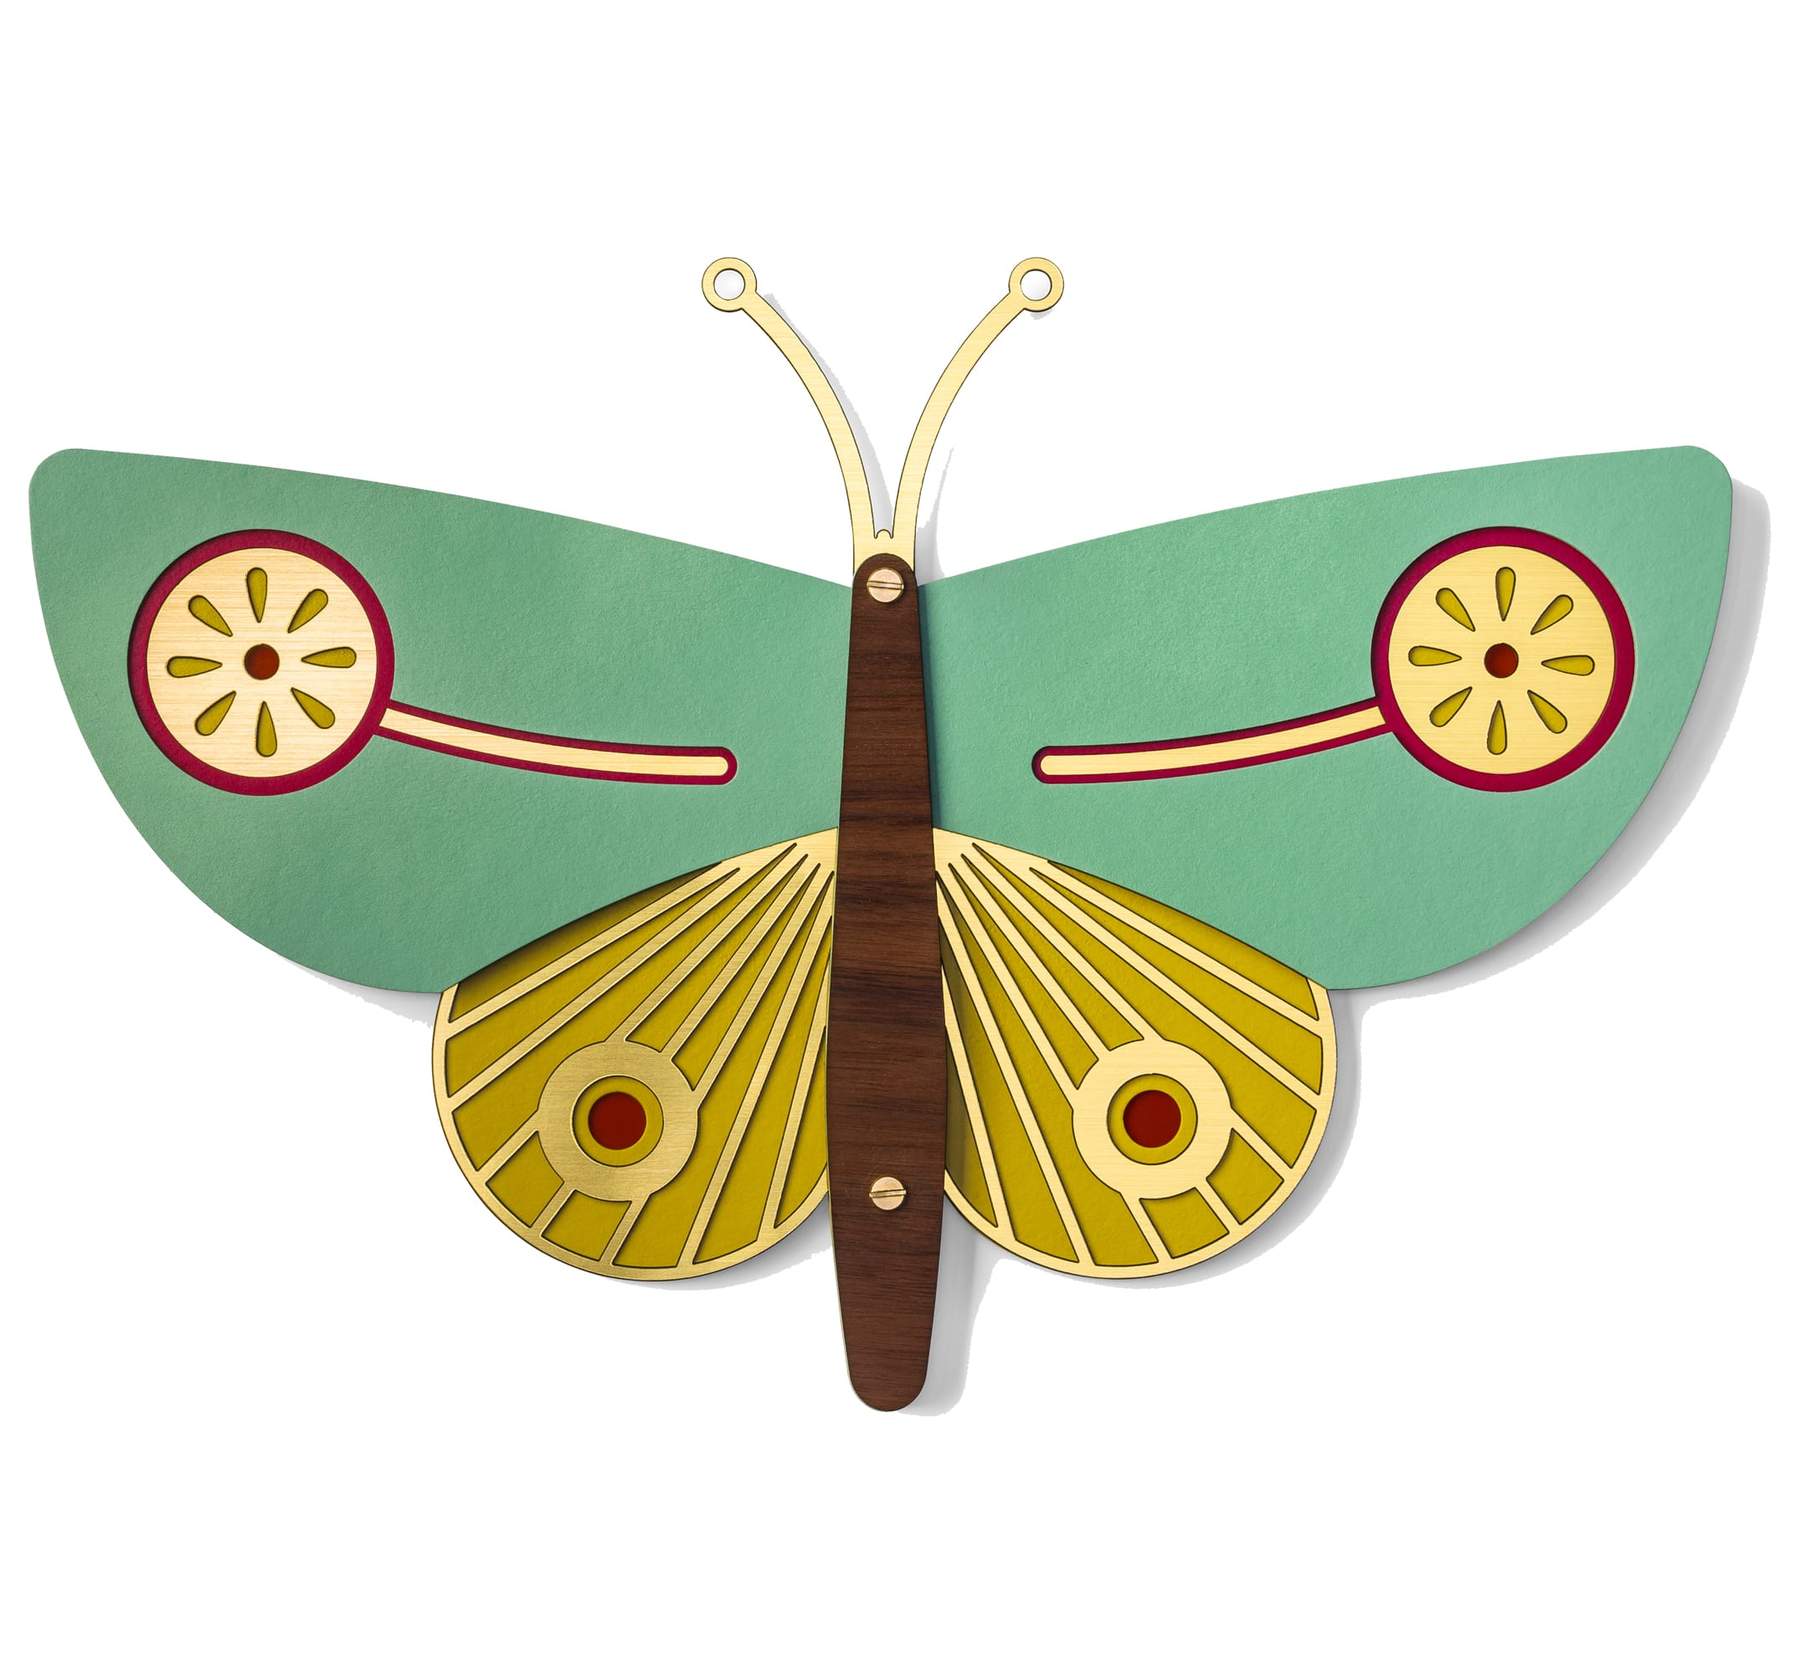 Colorful Swallowtail butterfly wall hanging is made of wooden